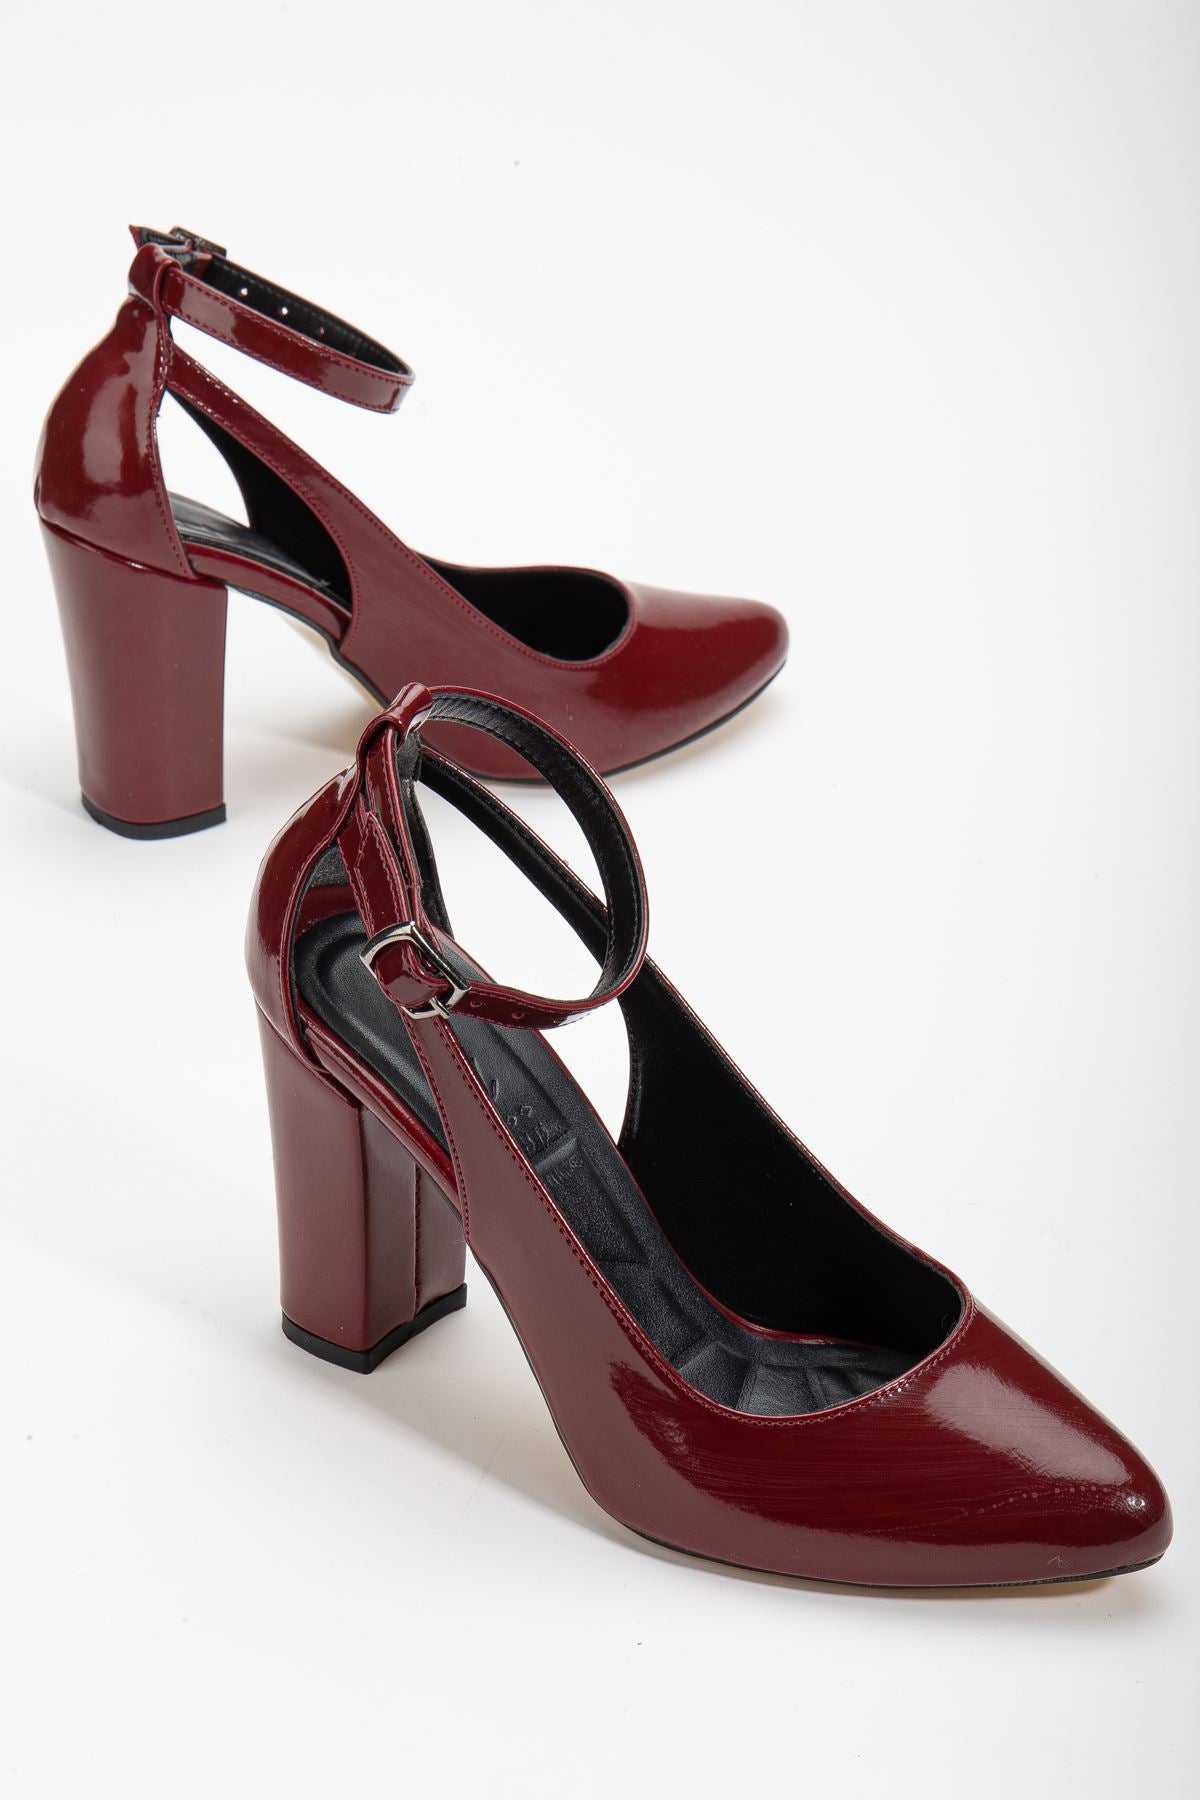 Lillian Heeled Burgundy Patent Leather Heeled Women's Shoes - STREETMODE™